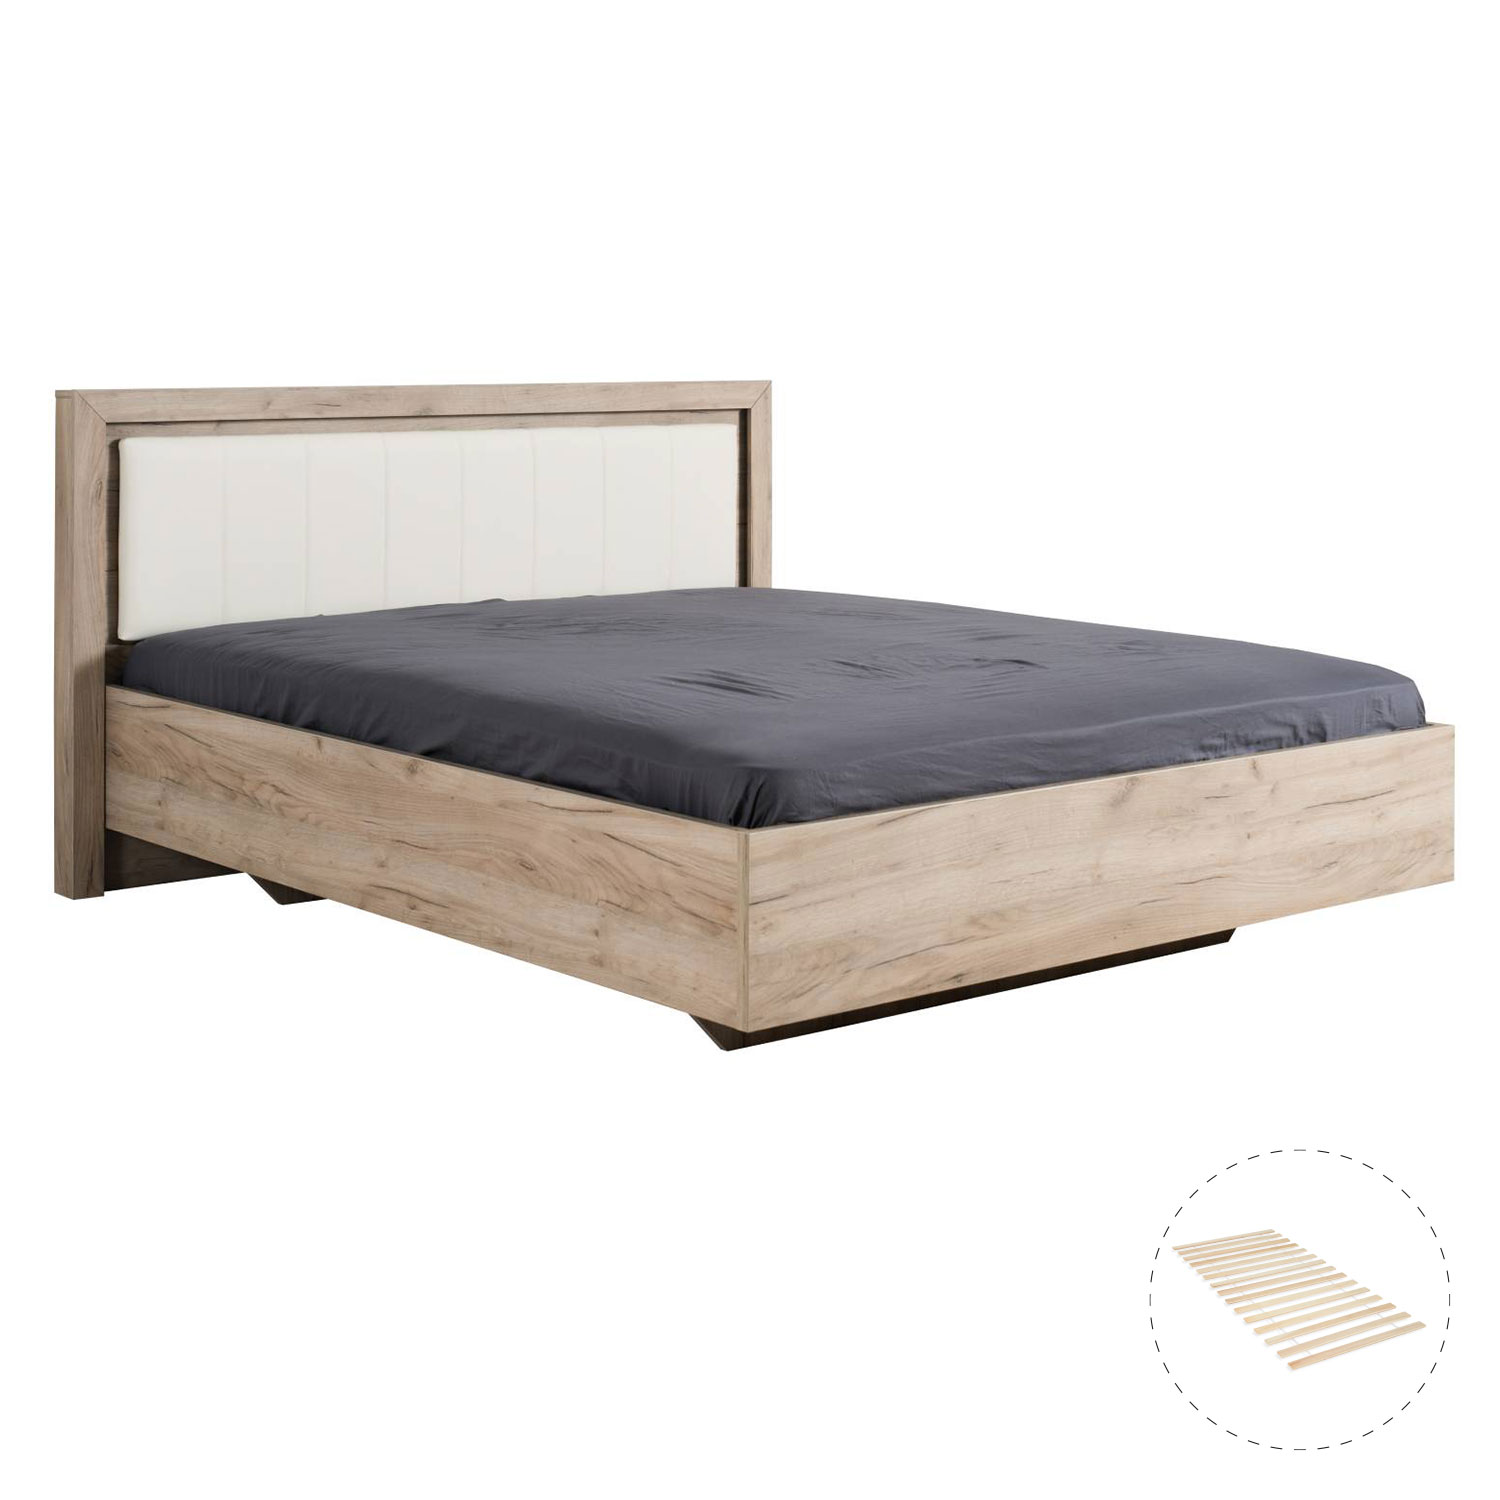 Wooden Bed Queen Size Bed Frame with Slats Double Bed 160x200 cm Oak Grey White Leather